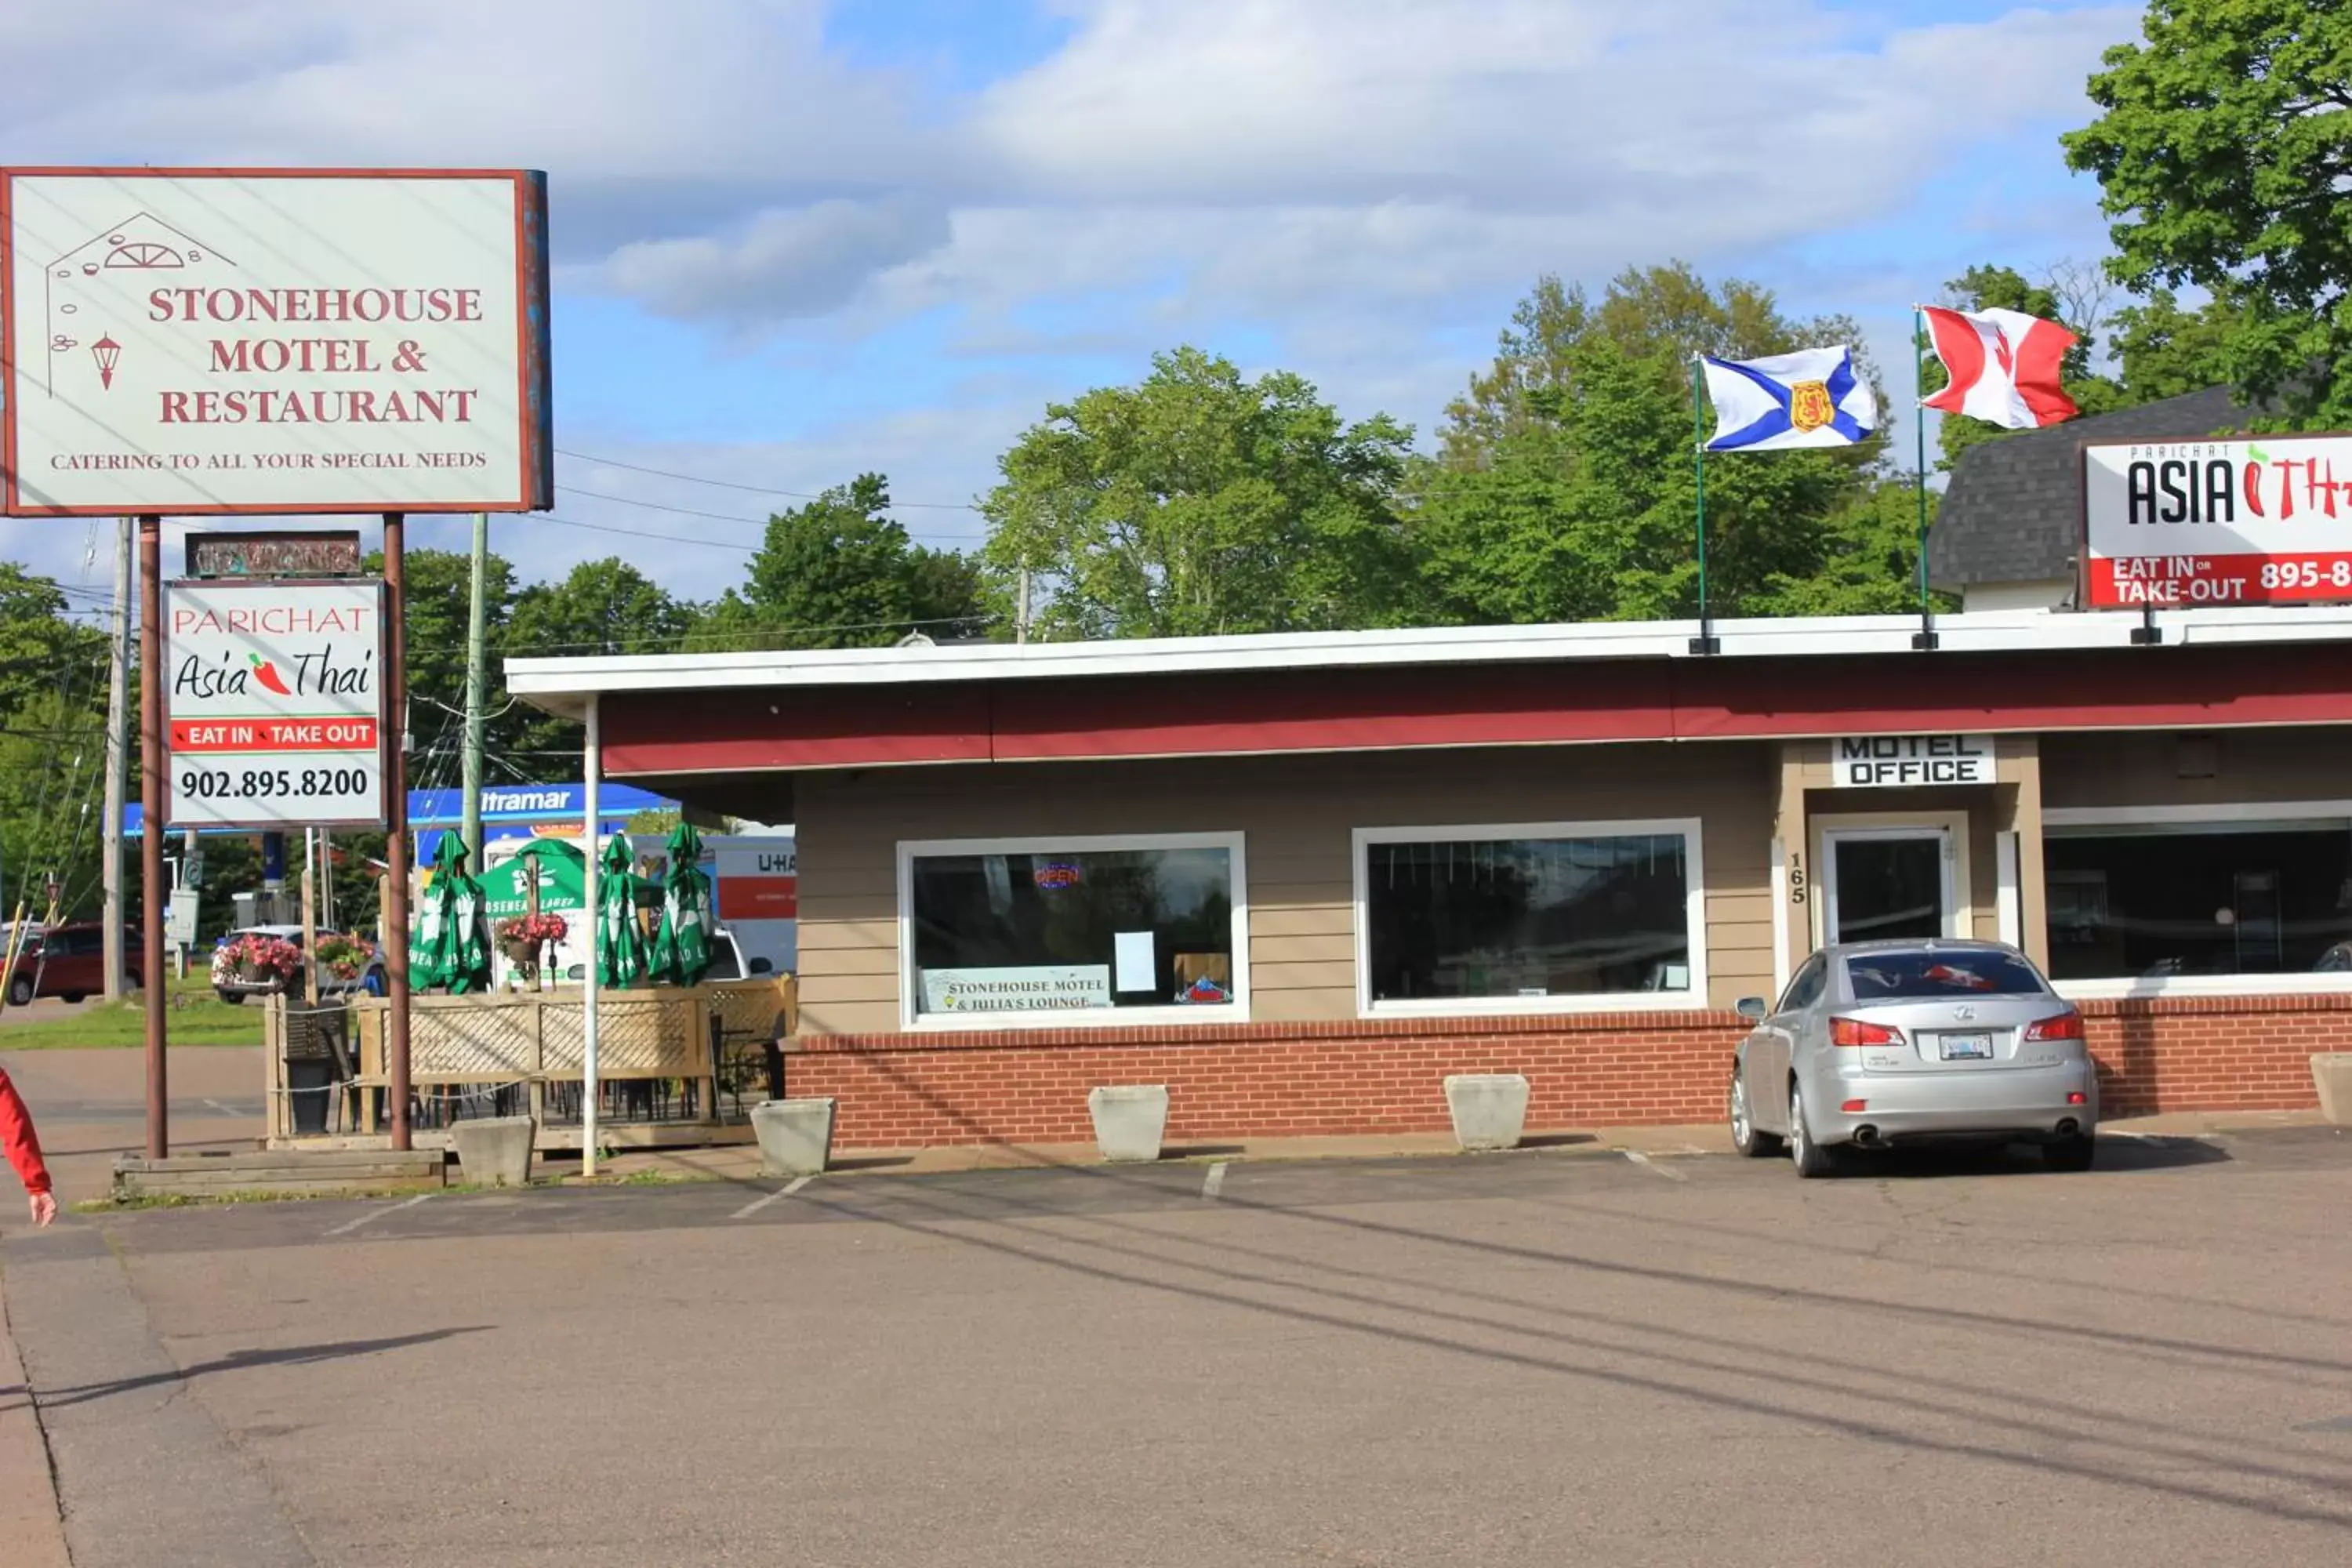 Property Building in Stonehouse Motel and Restaurant